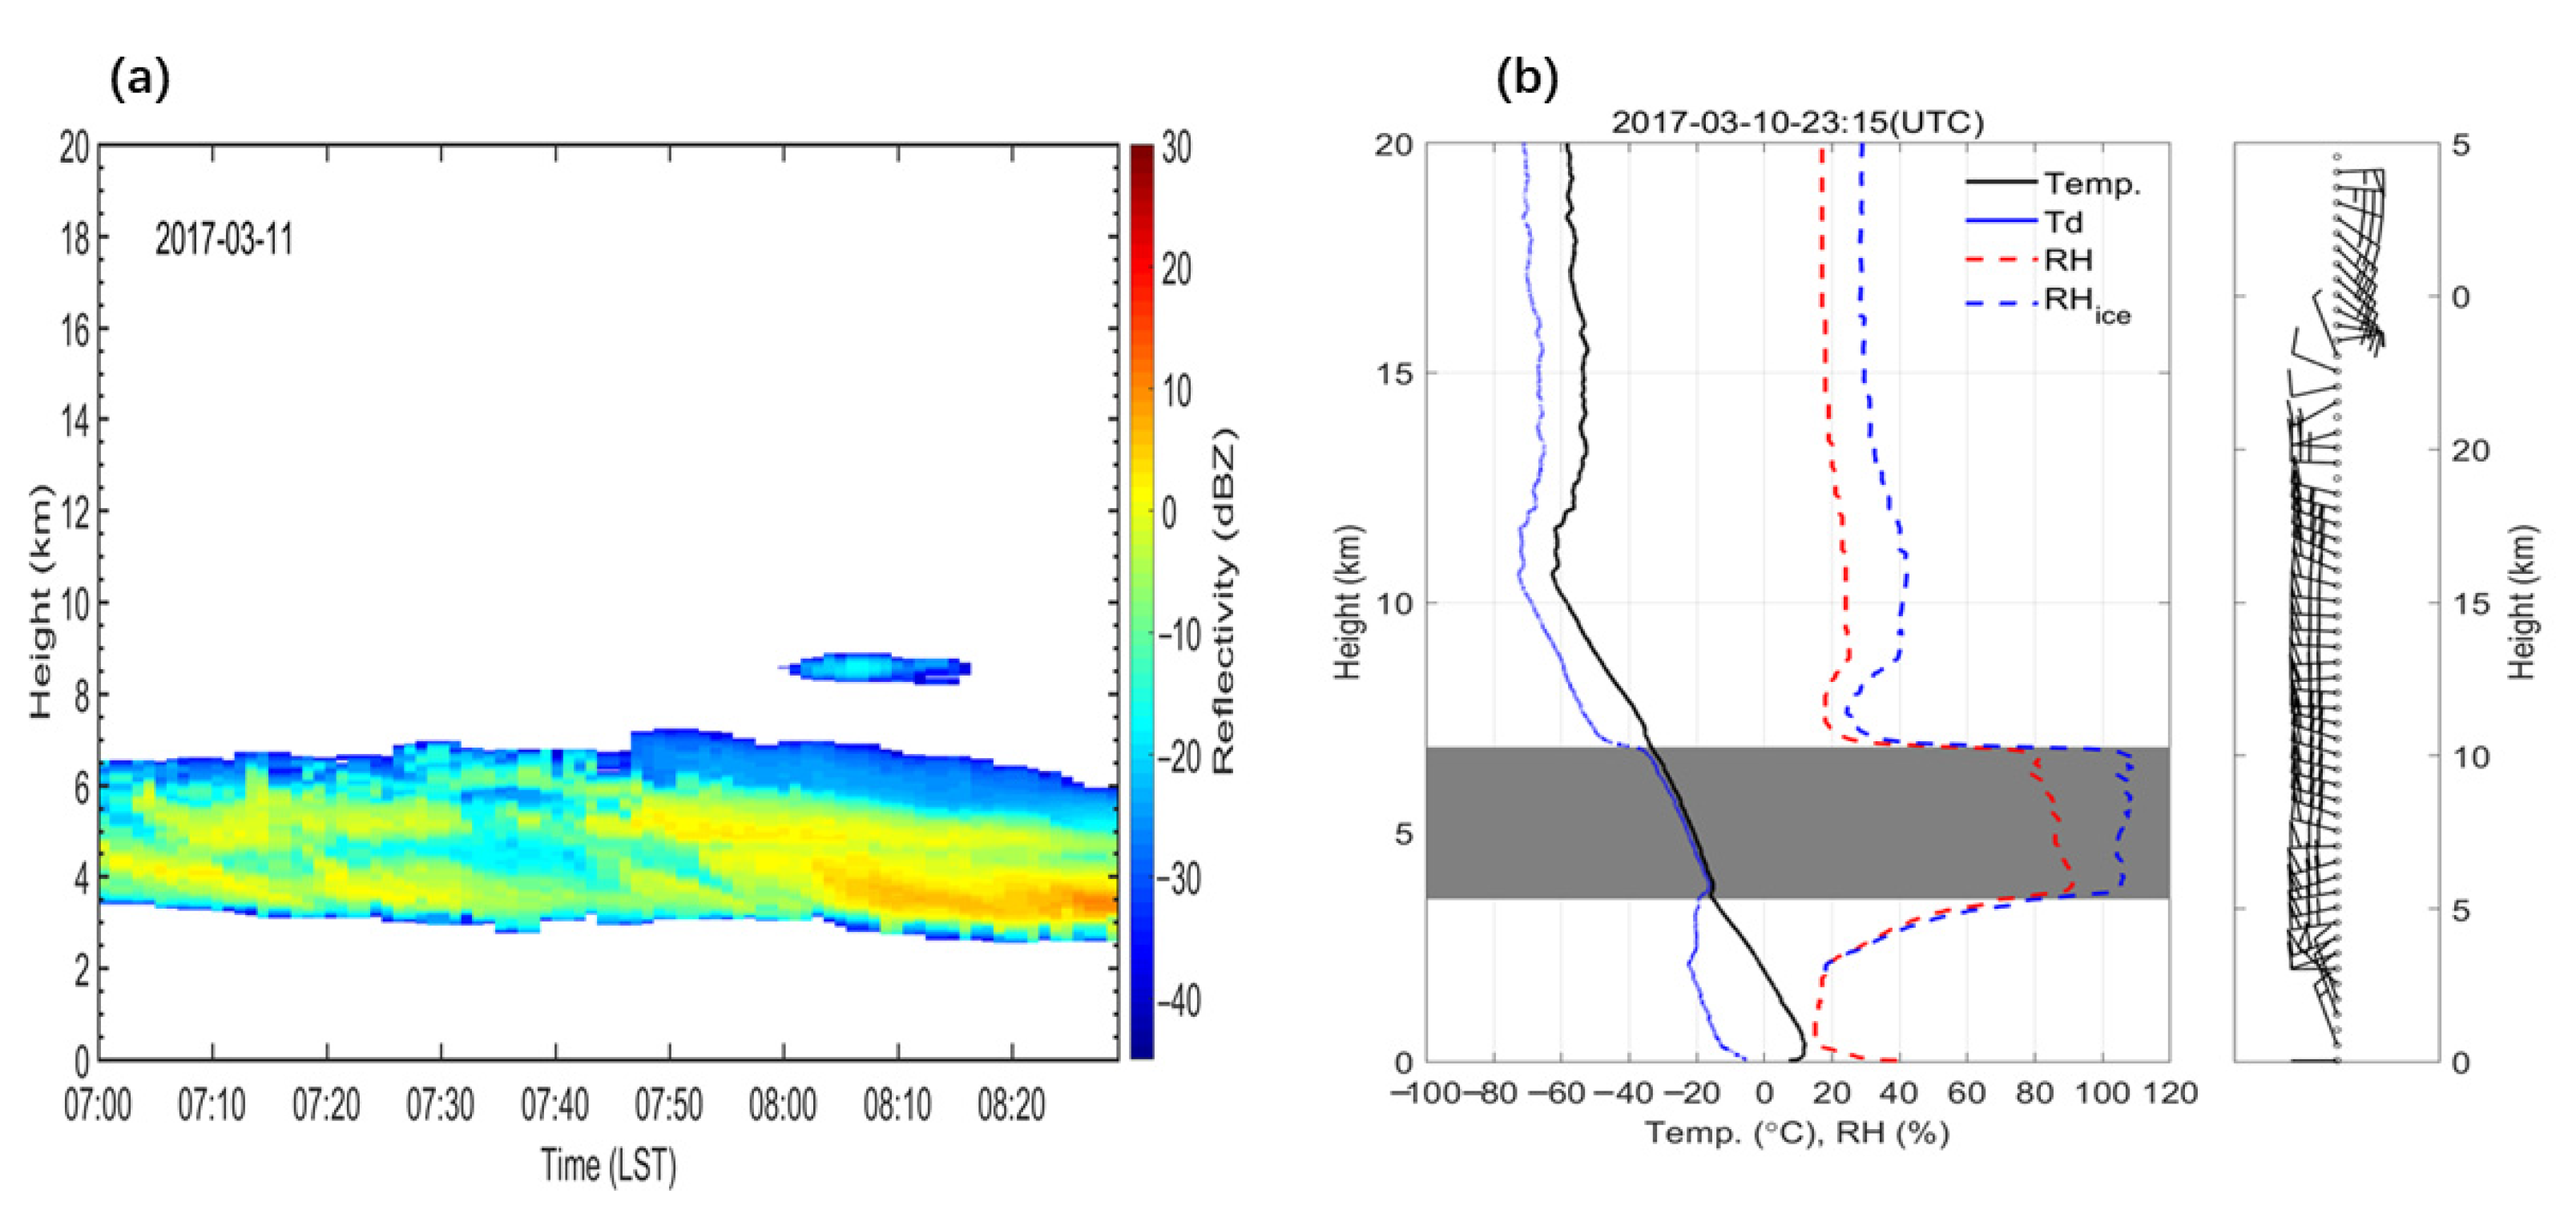 Area averaged cloud base heights (CBH) and maximum cloud top heights